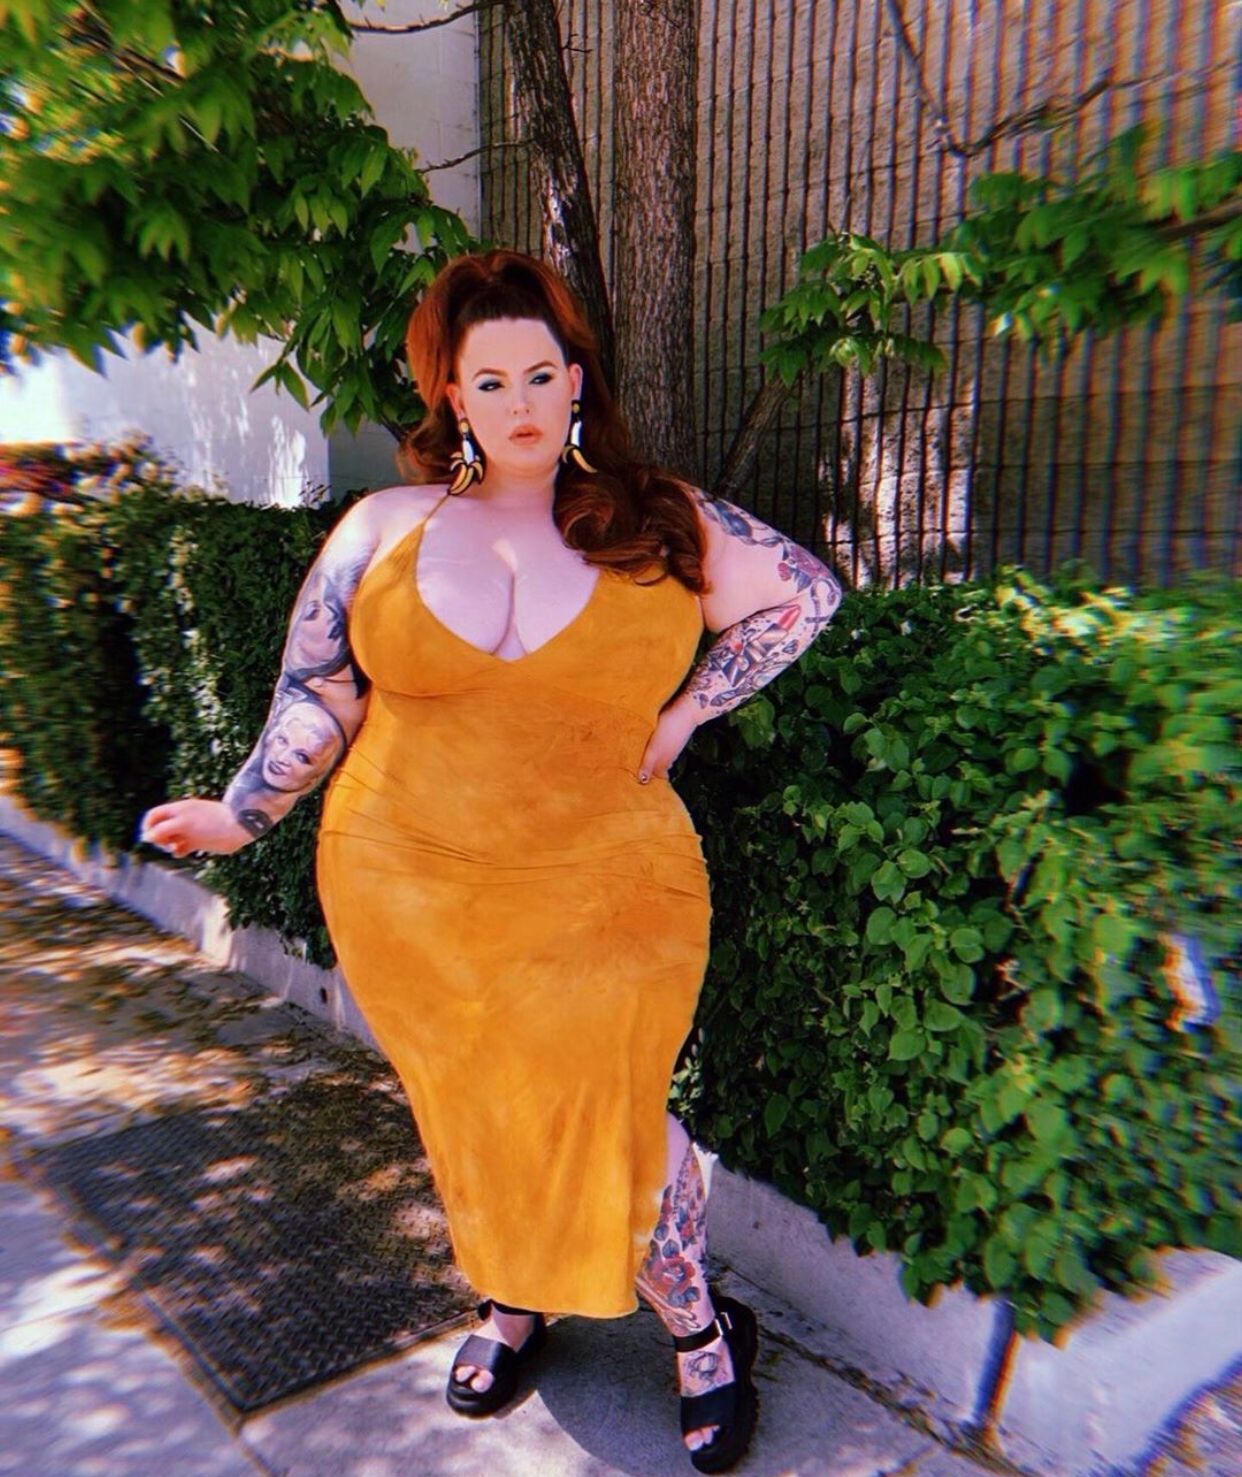 Plus-Size Model Tess Holliday on Fat Acceptance, Her First Book, and Her Rape